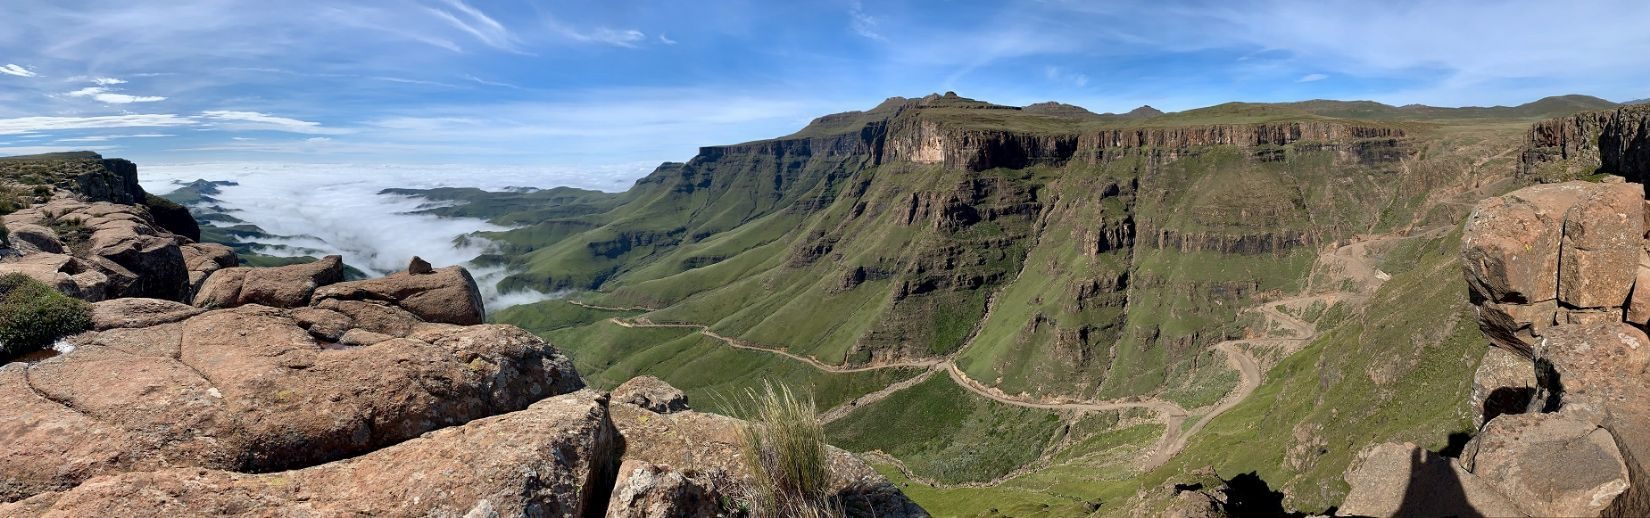 View of the Sani Pass